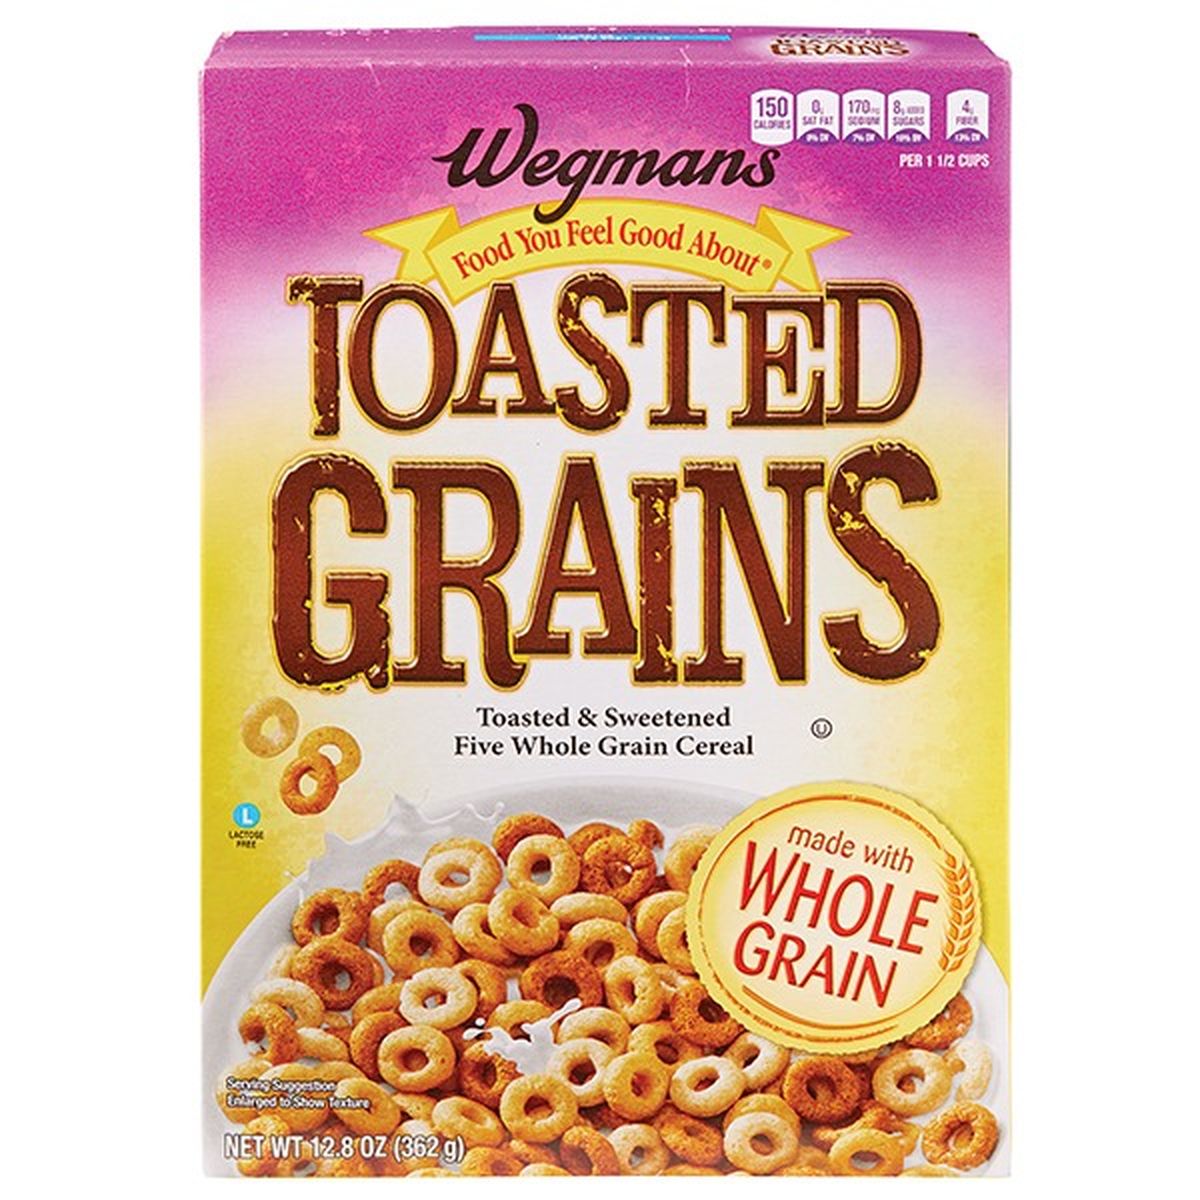 Calories in Wegmans Toasted Grains Cereal